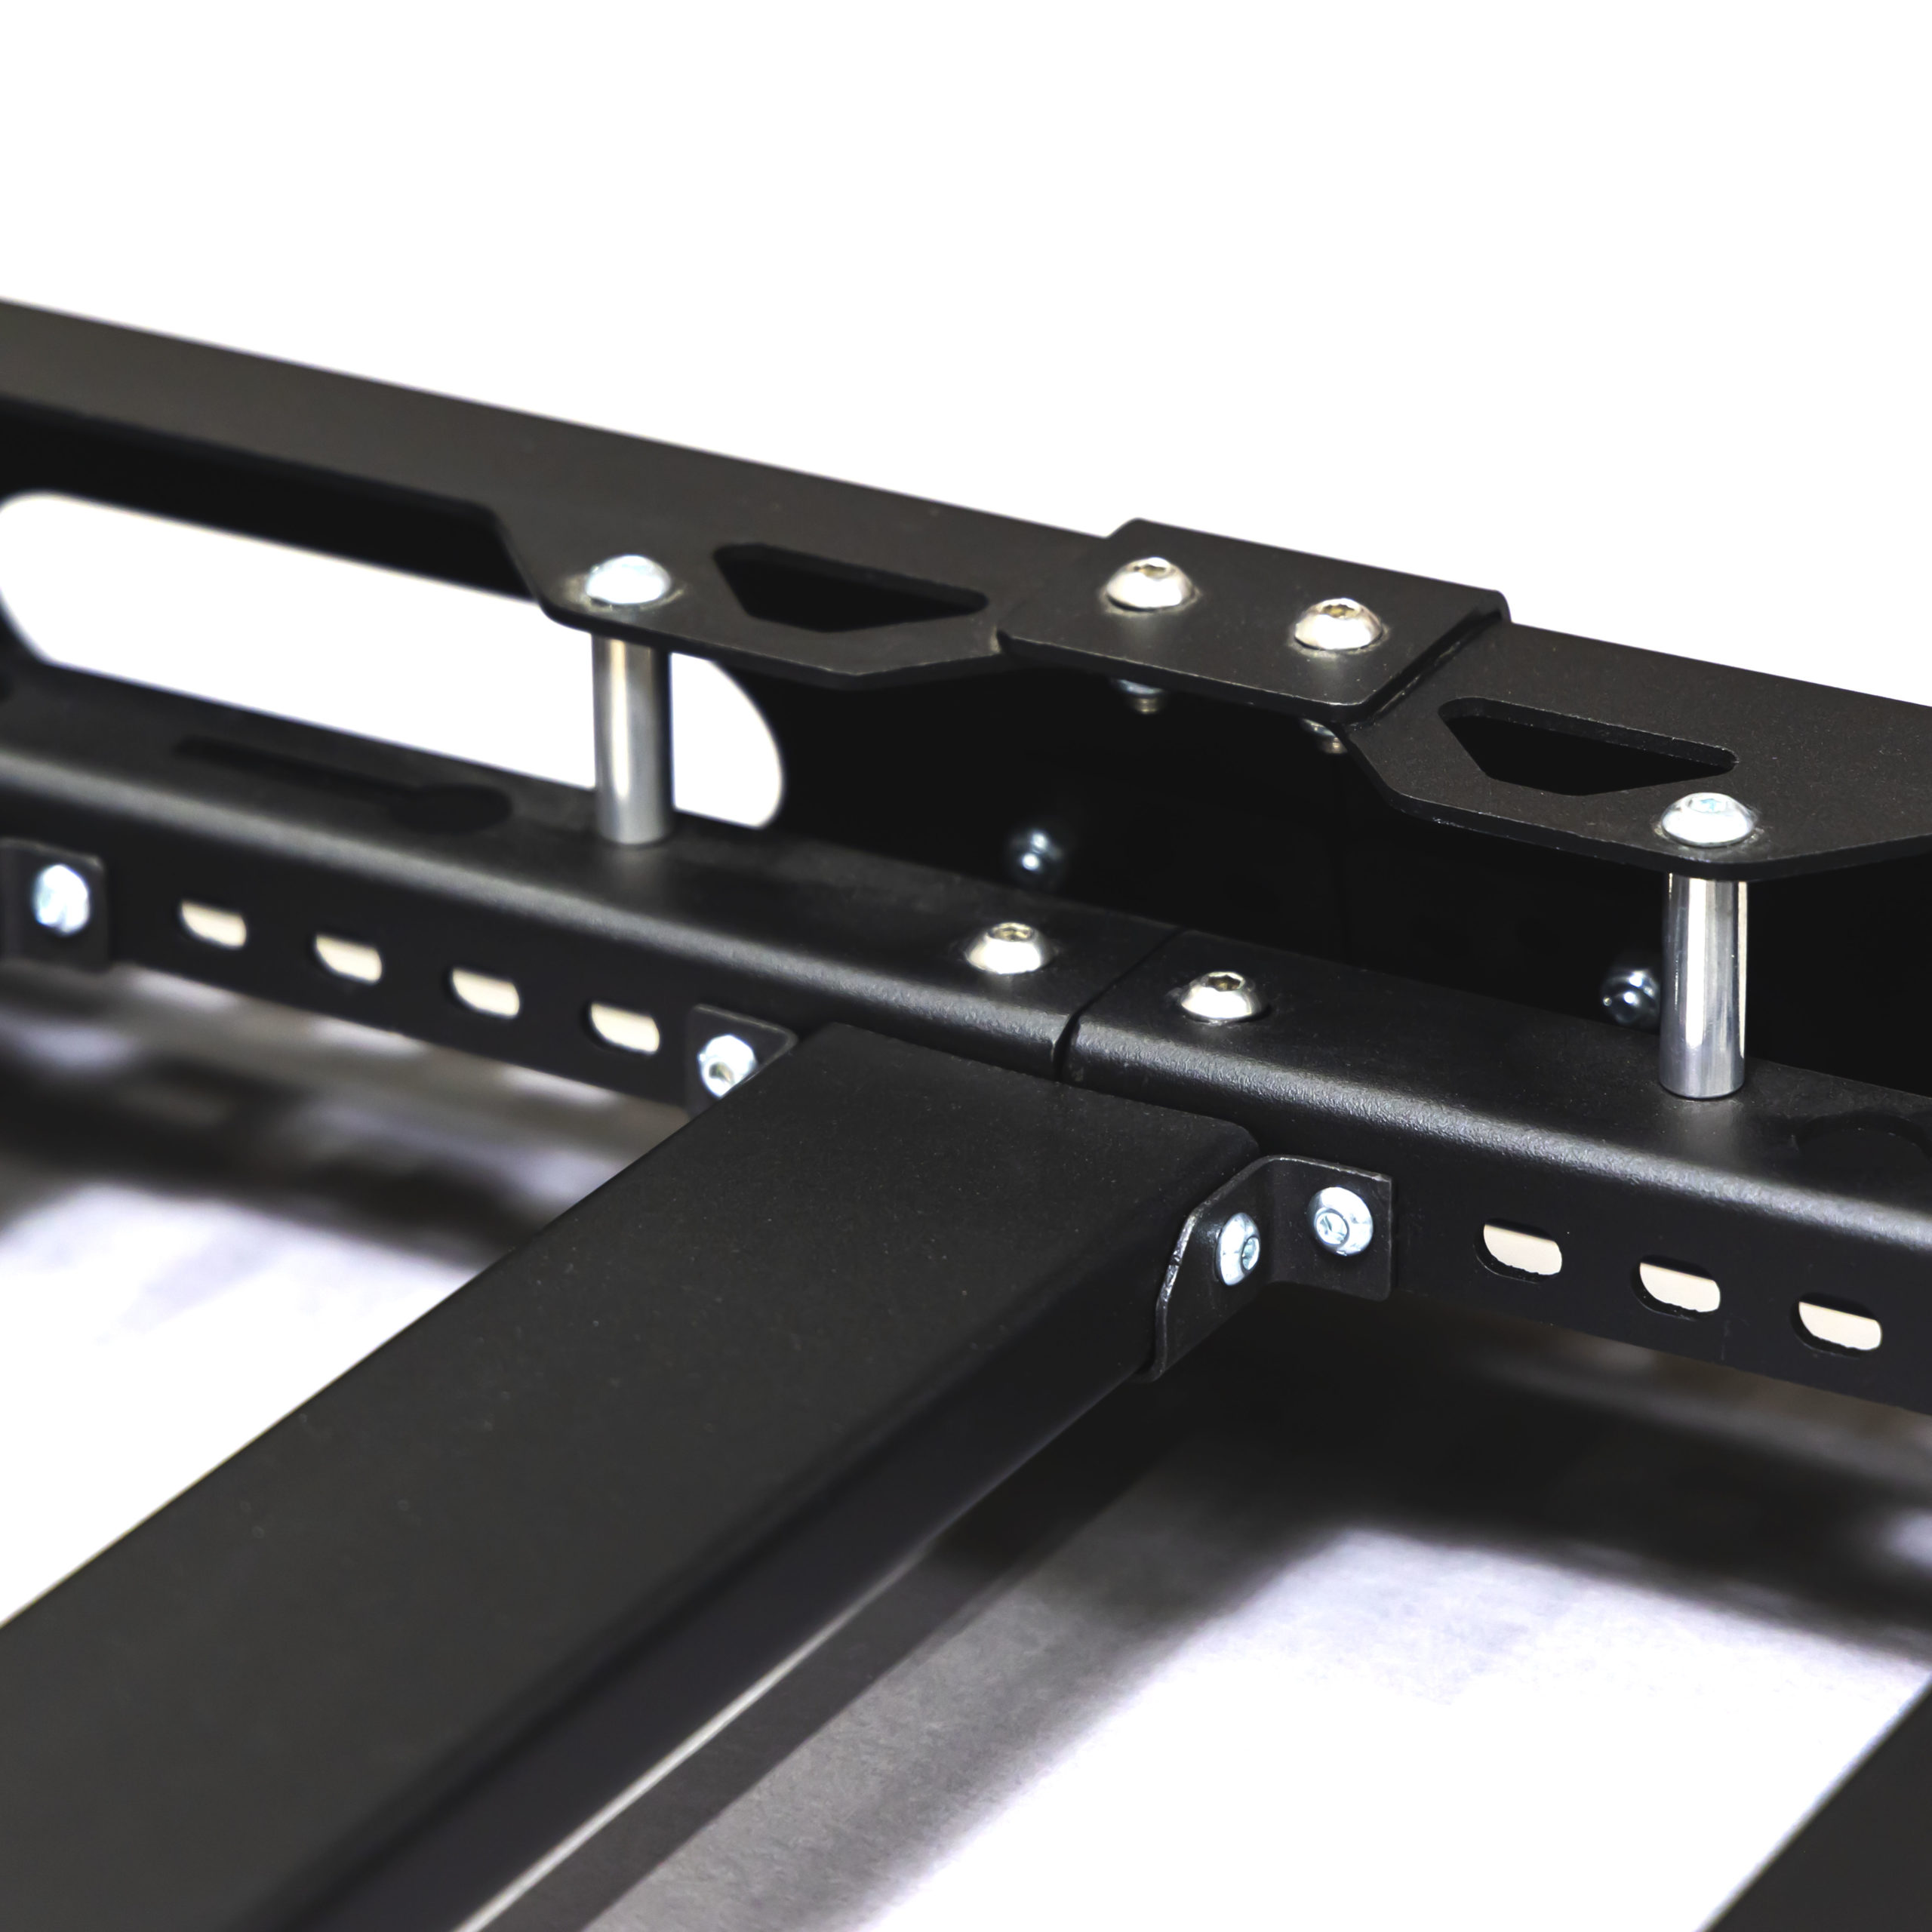 close up view of hardware and assembly of the Saga Sprinter van roof rack